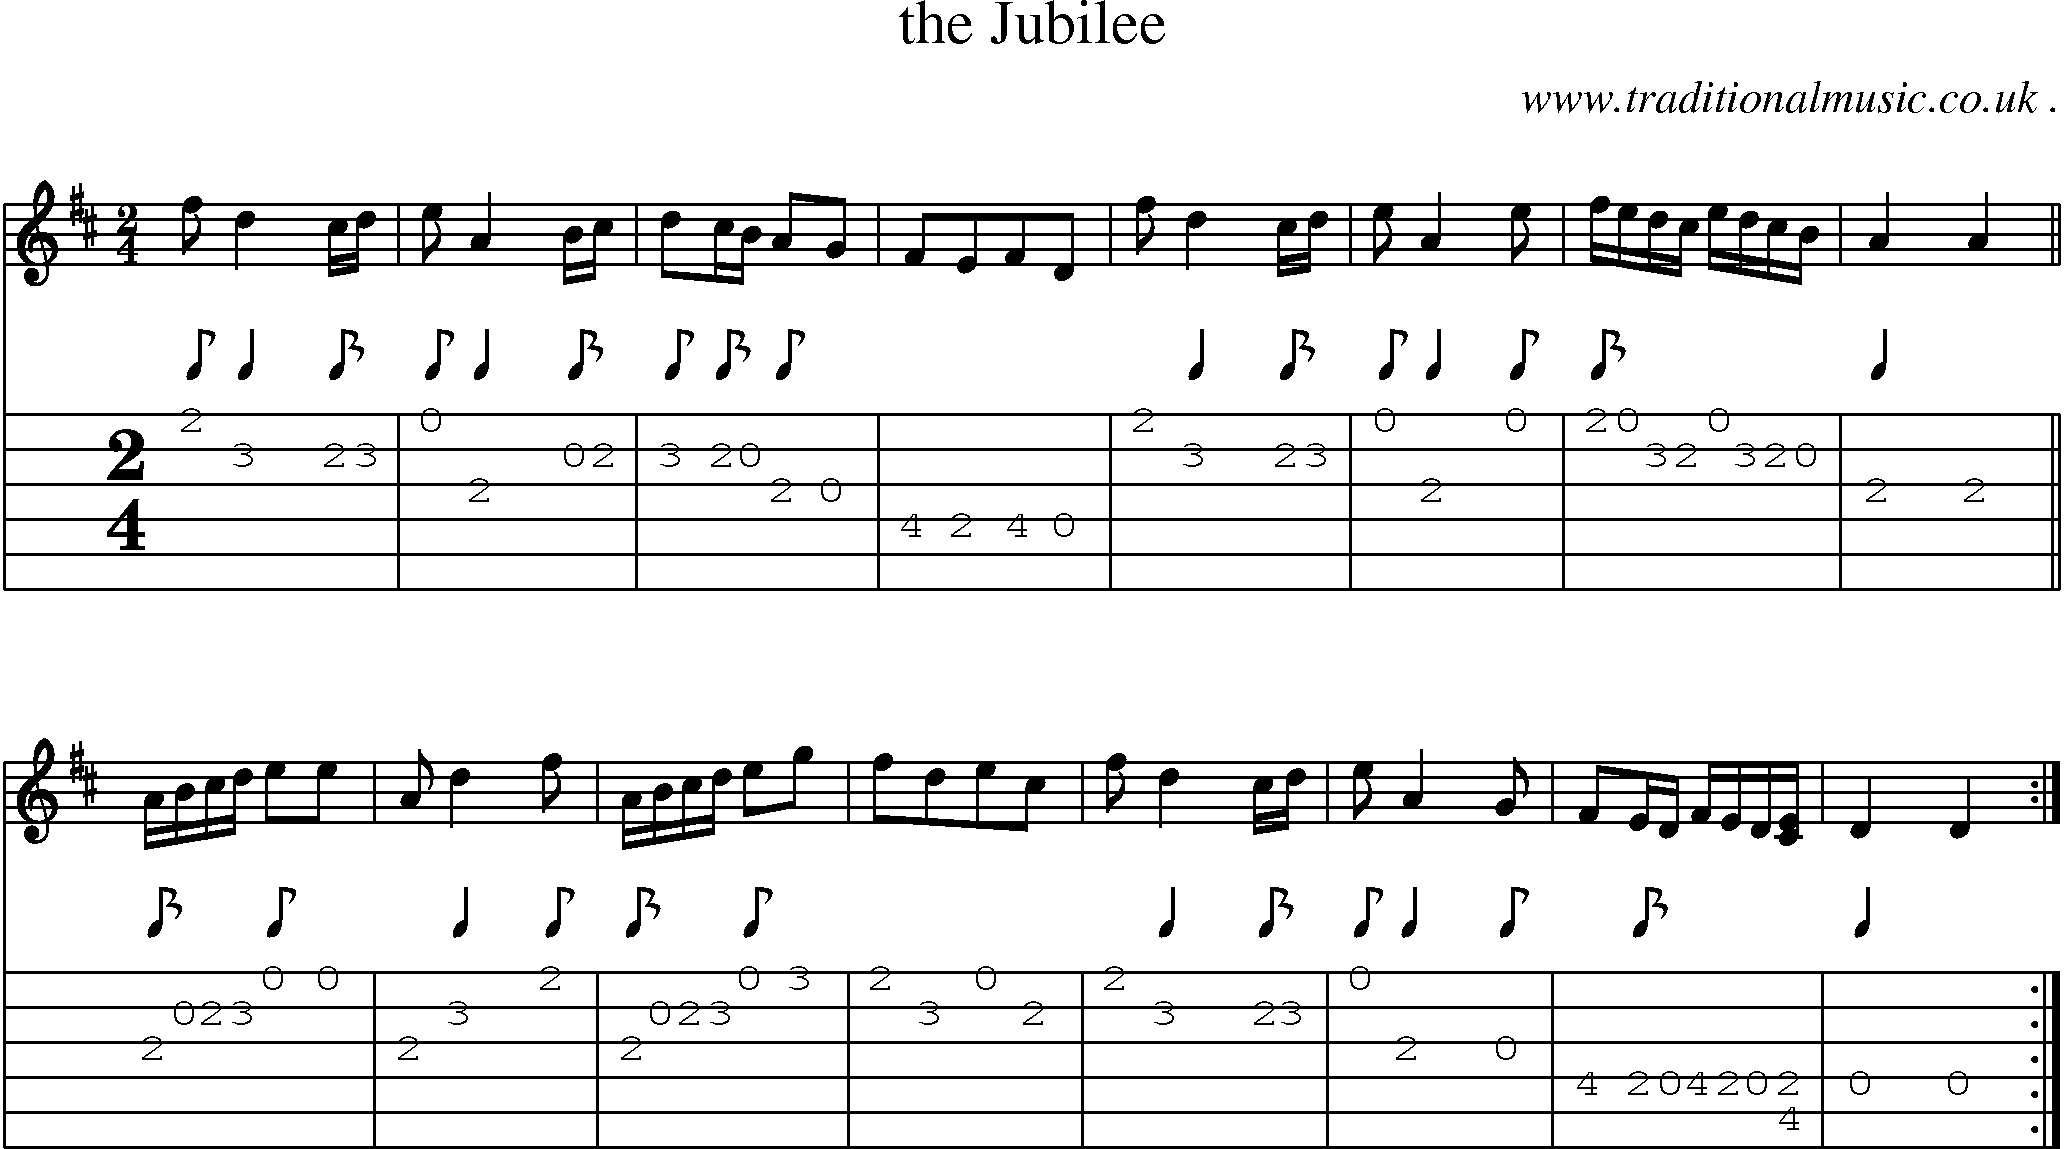 Sheet-Music and Guitar Tabs for The Jubilee